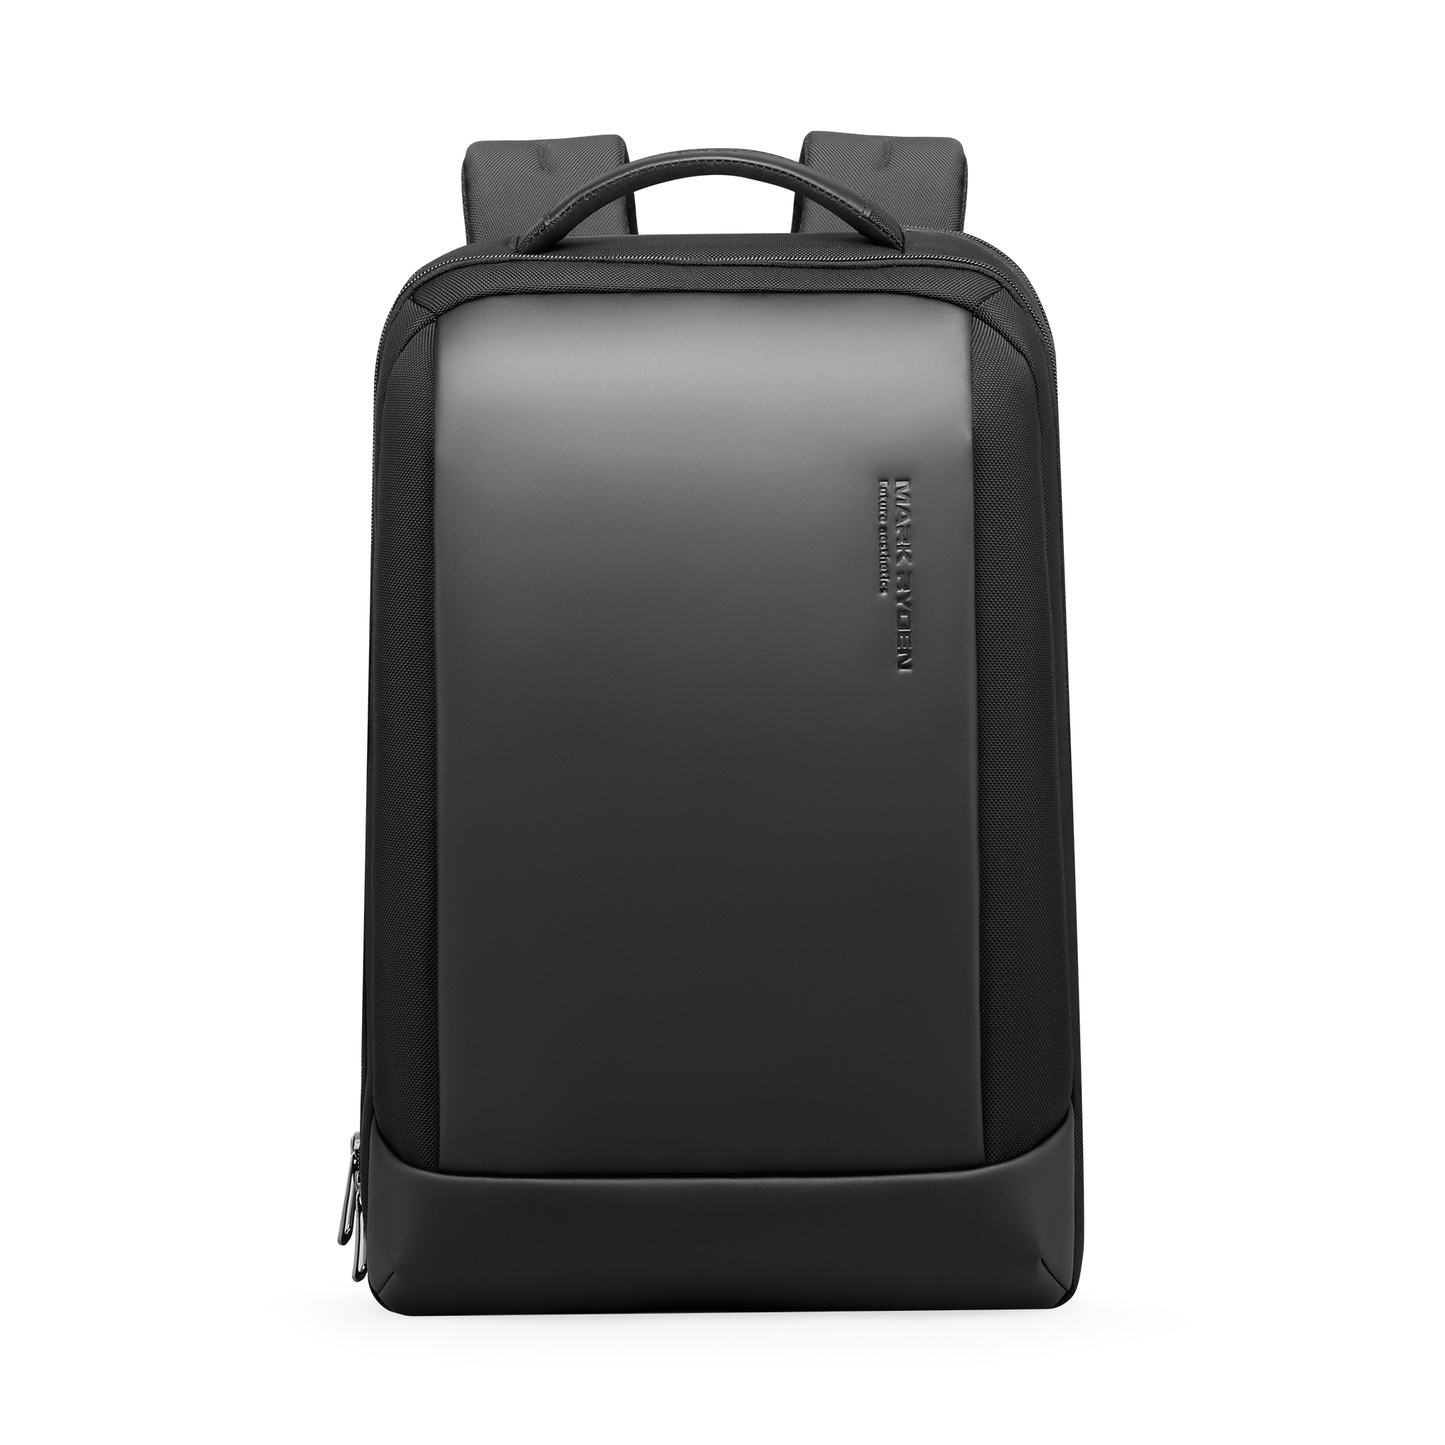 Essential: Multi-functional Travel Mate Durable Waterproof High-Capacity Backpack with USB Port